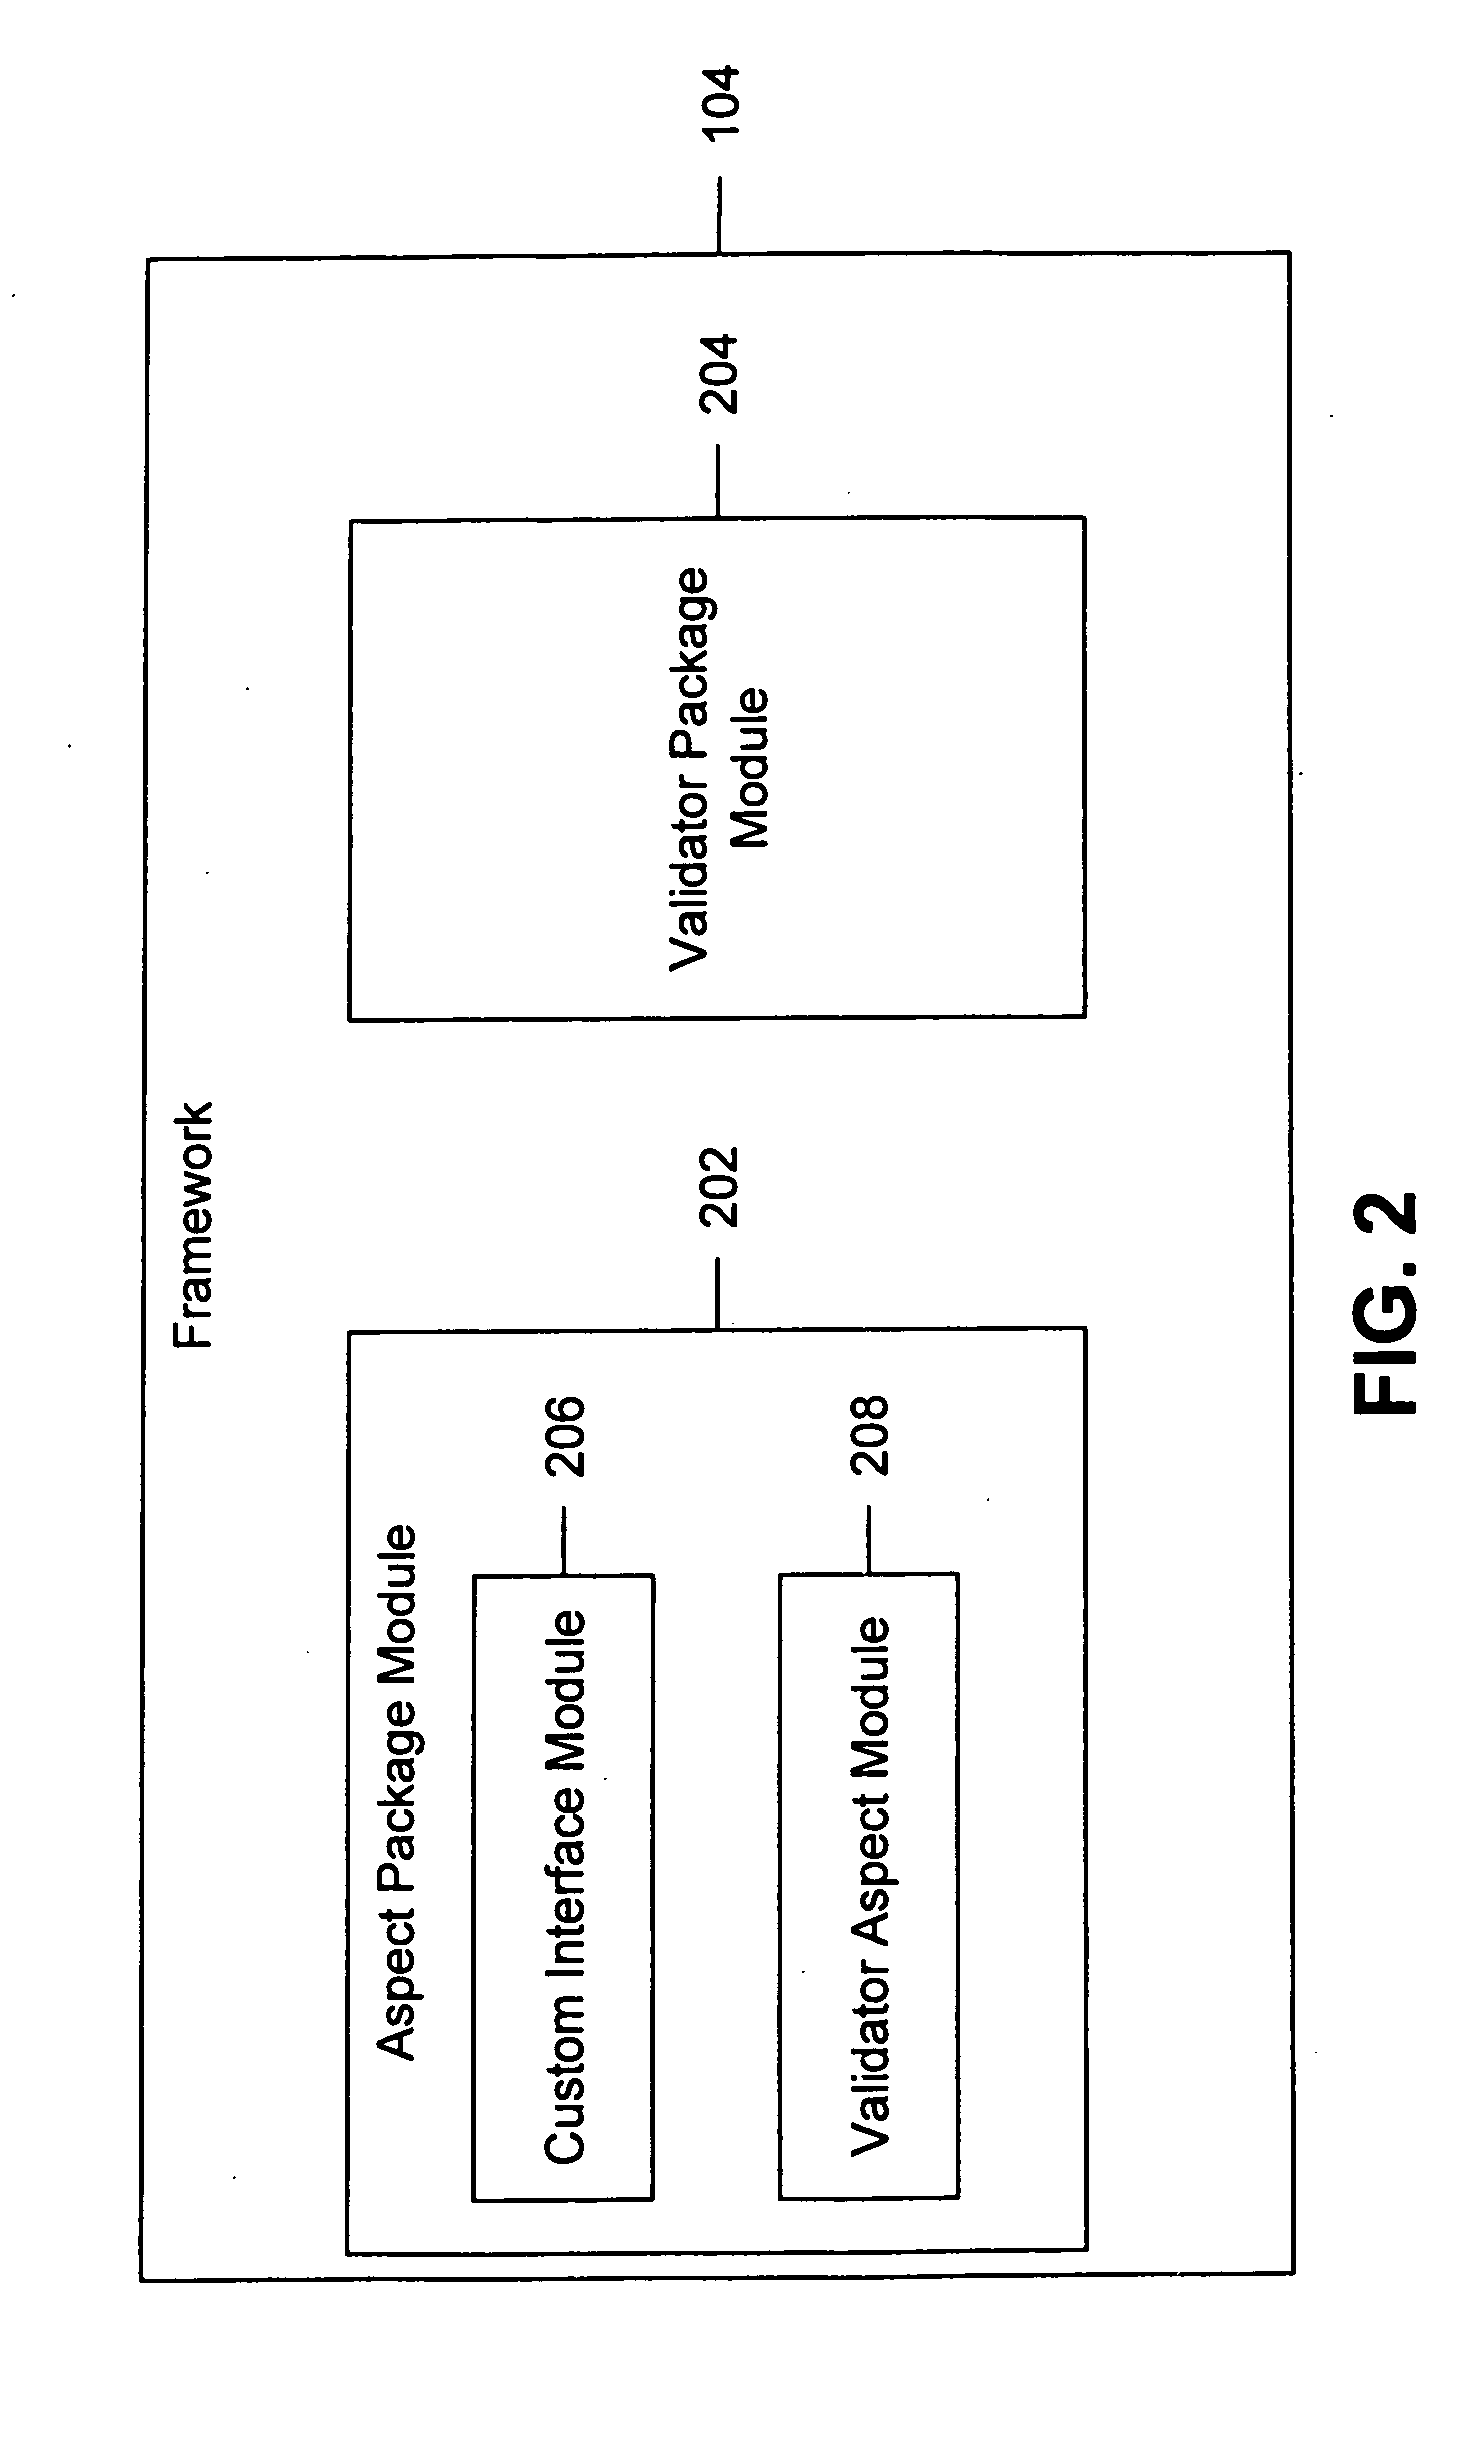 Method and framework for securing a source code base